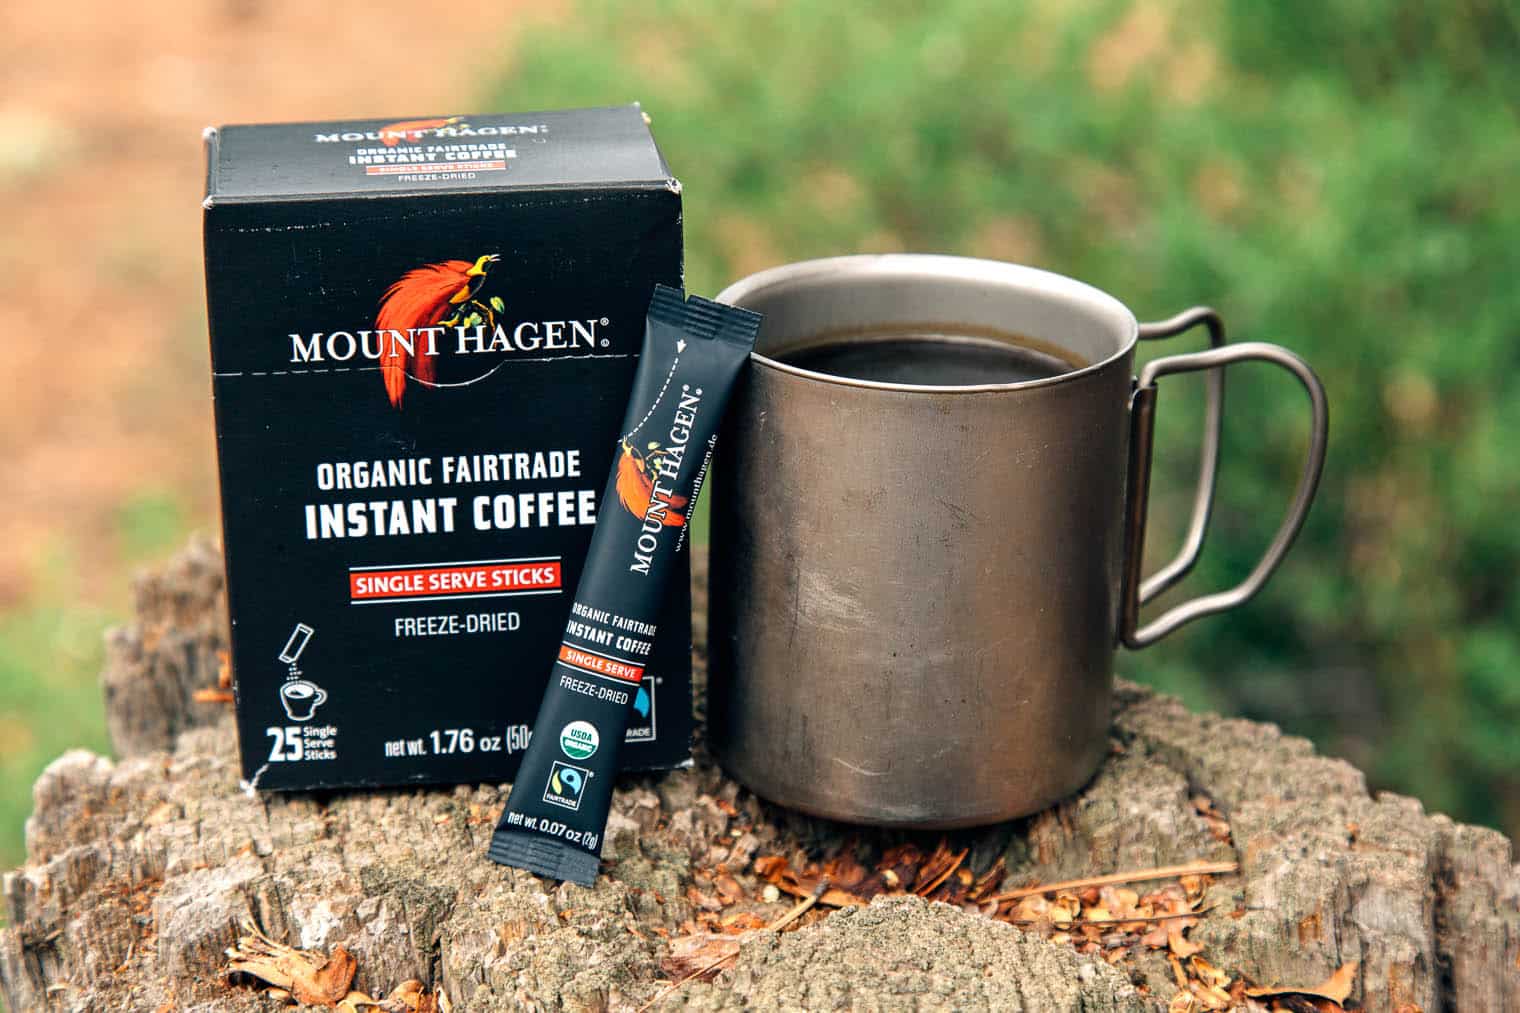 Mount Hagen instant coffee packaging next to a camp mug